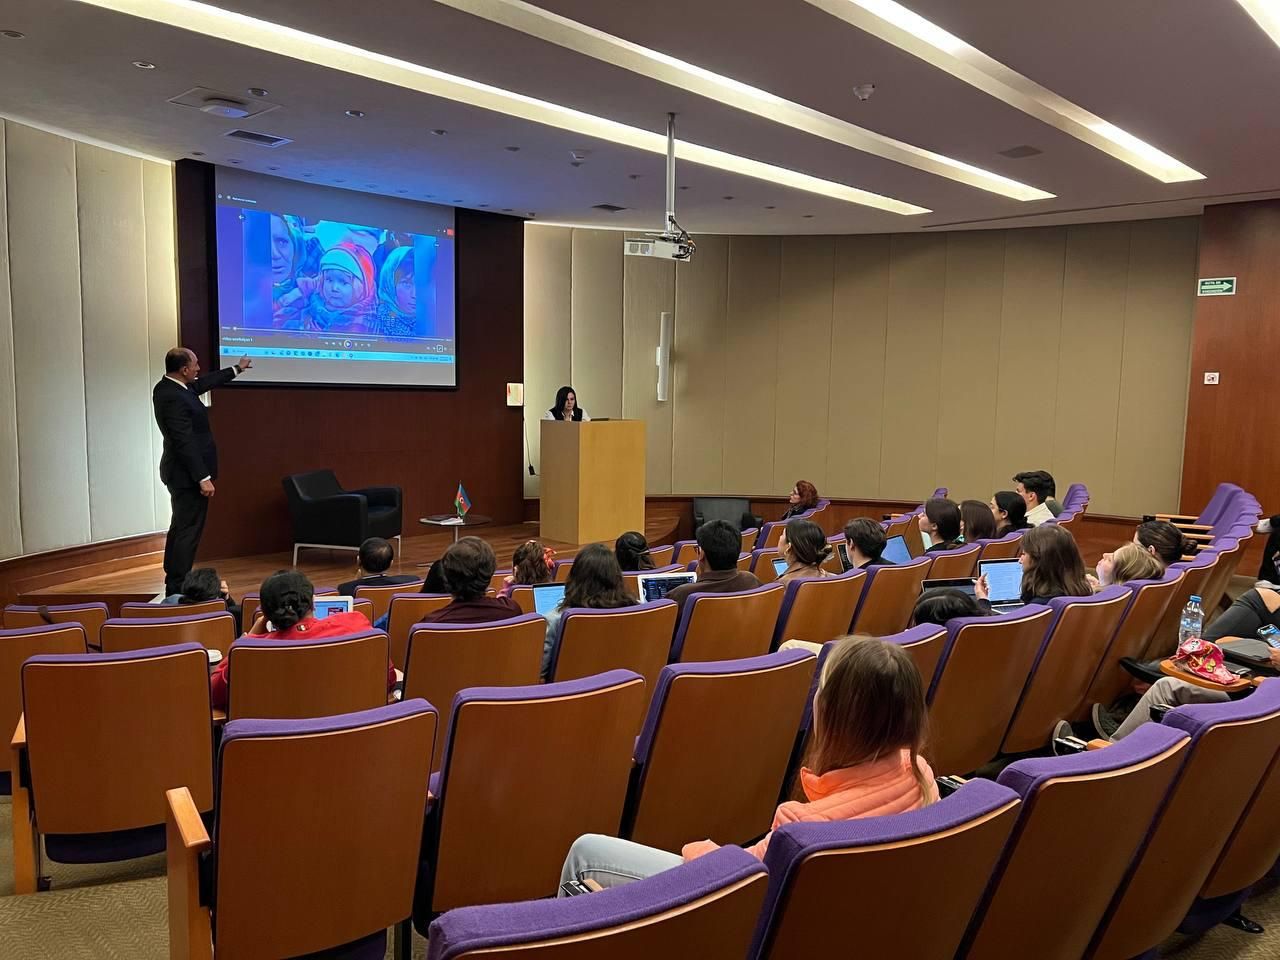 Azerbaijani Ambassador to Mexico meets with students at Institute of Technology [PHOTOS]